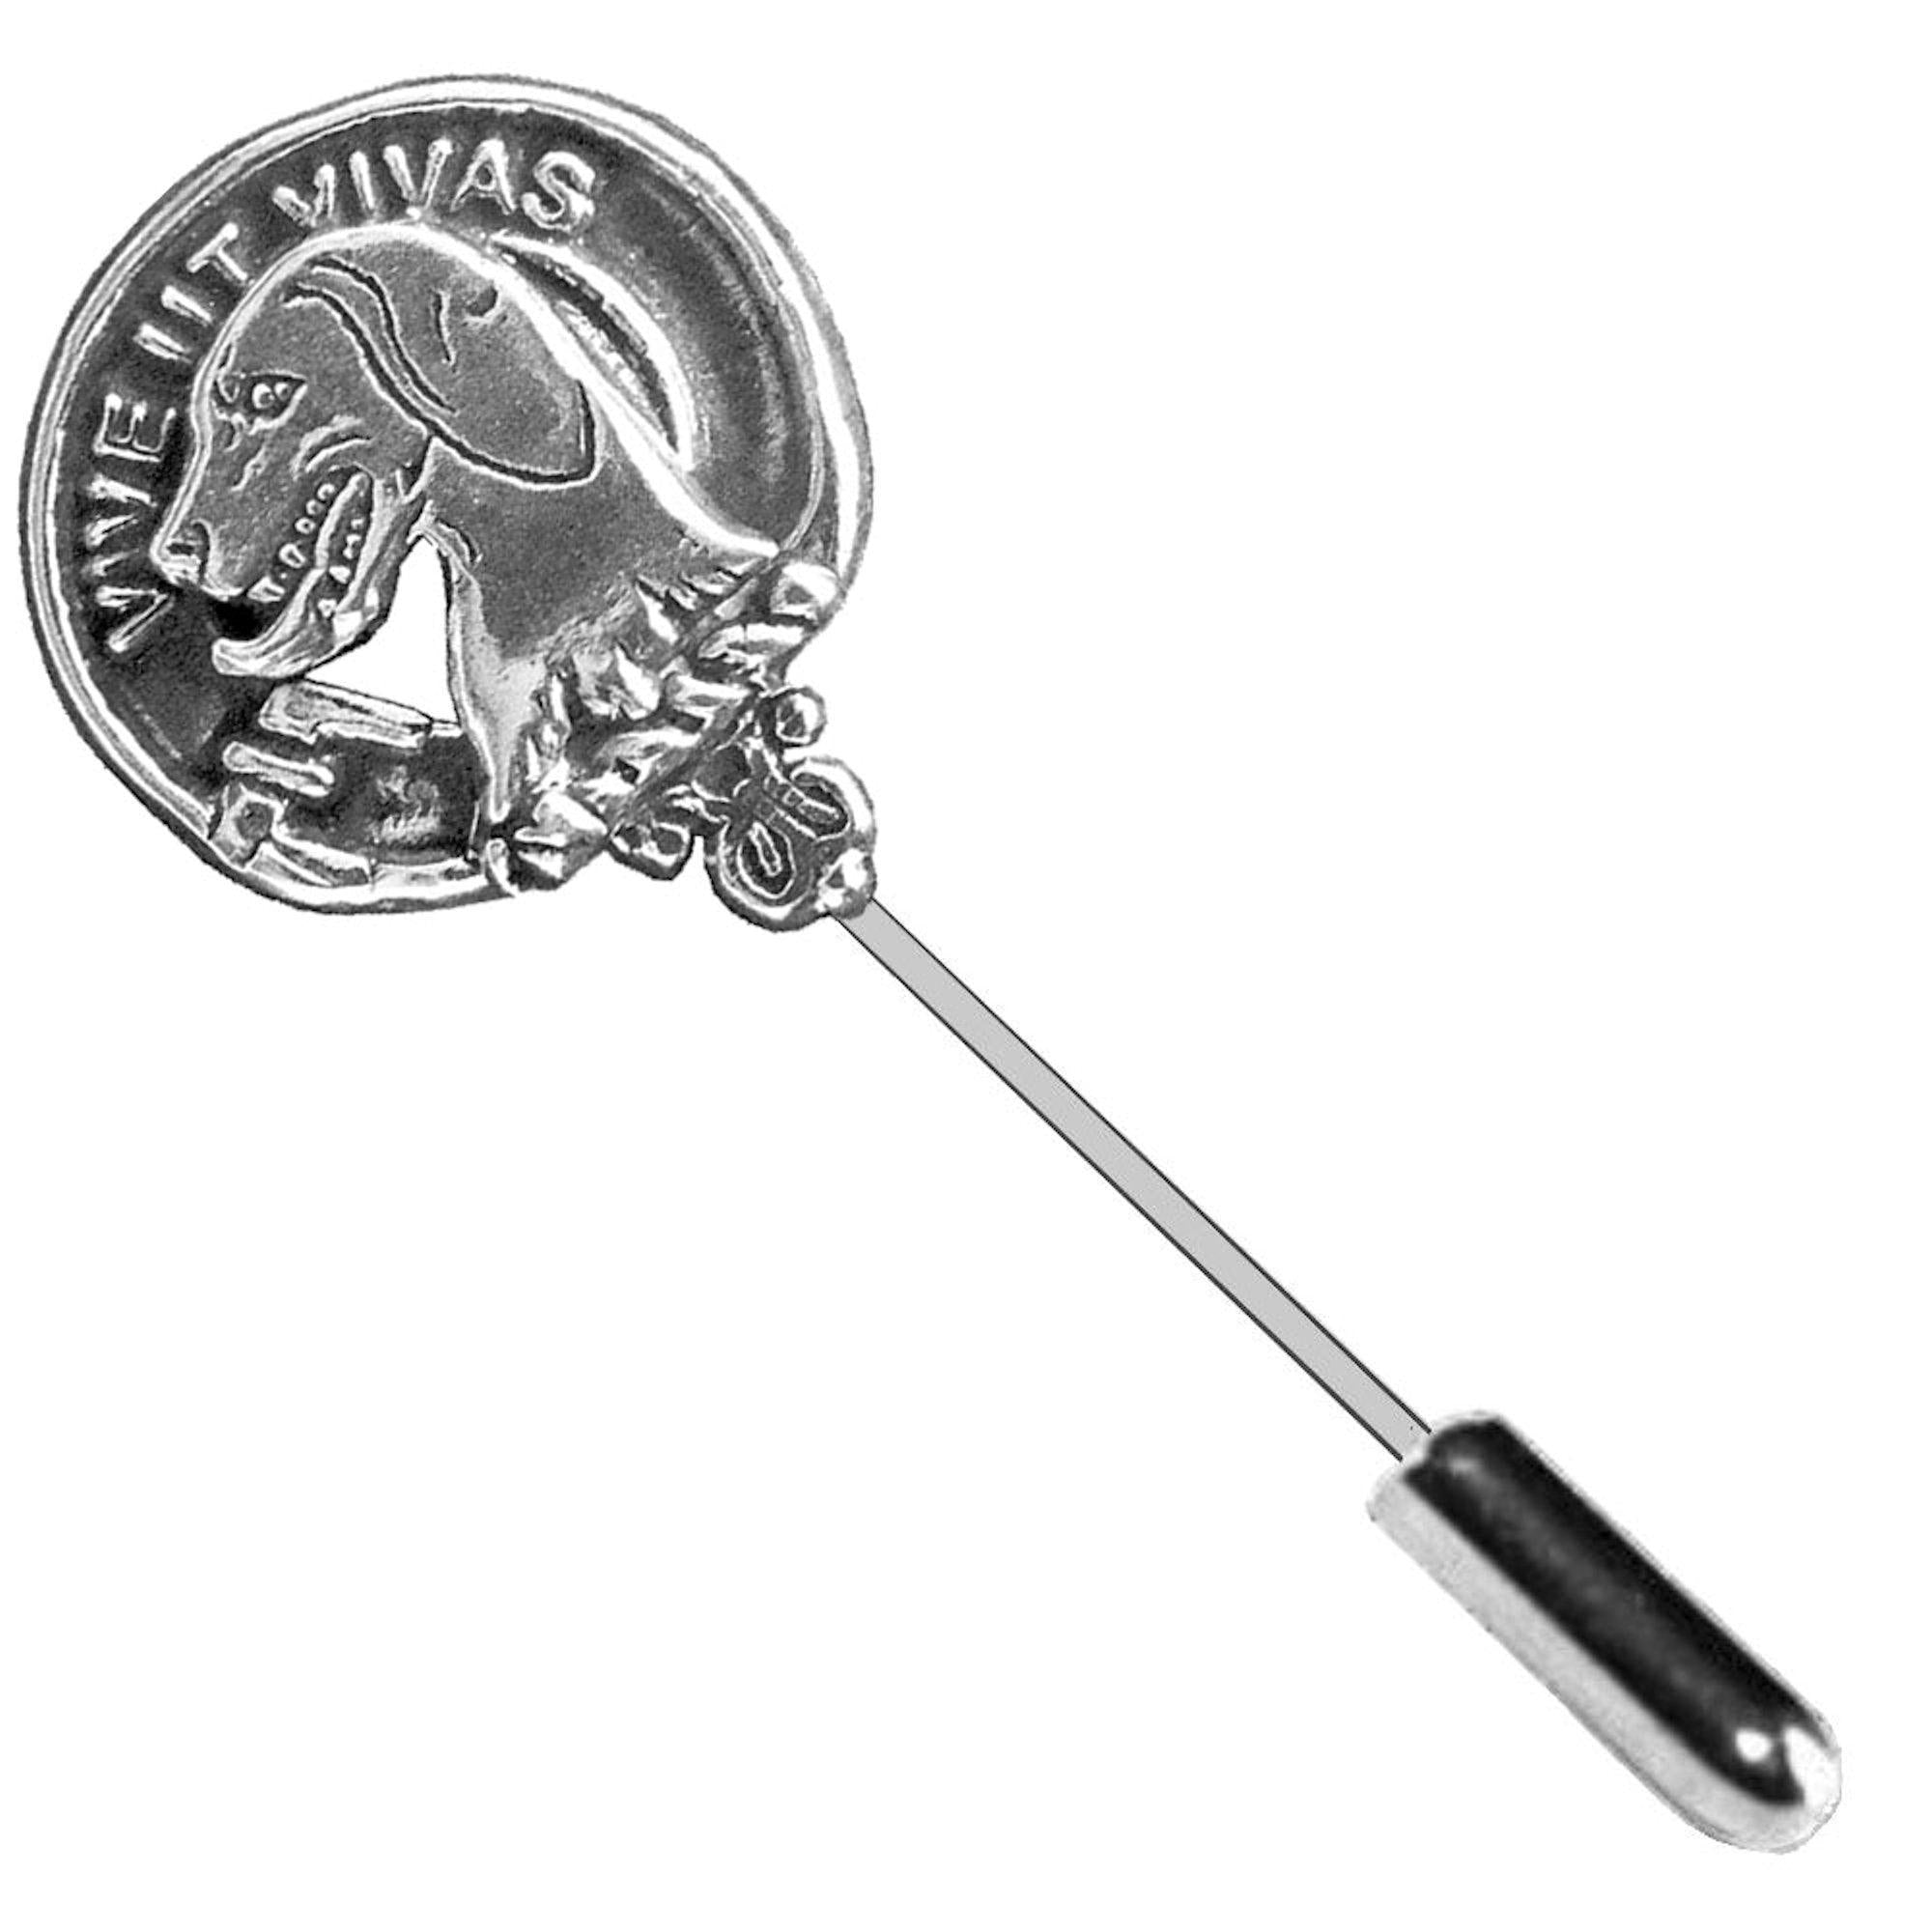 Hall Clan Crest Stick or Cravat pin, Sterling Silver